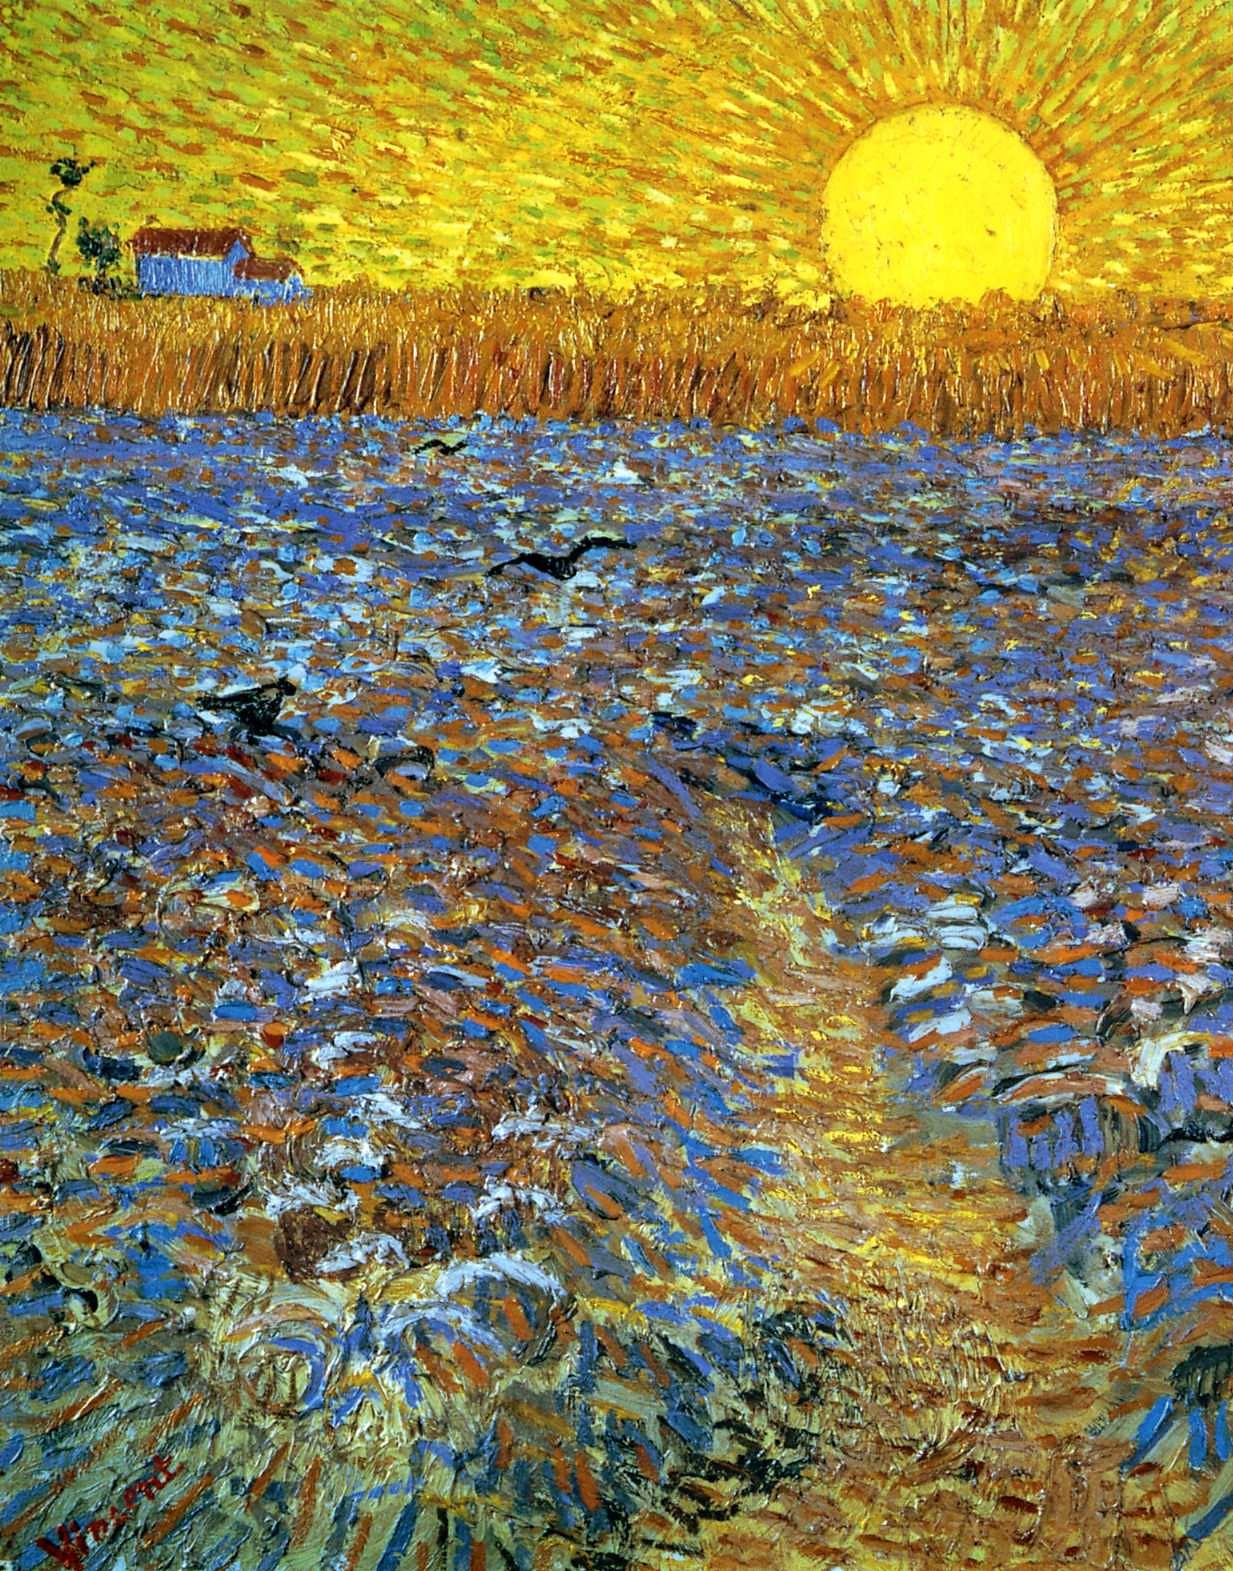 Golden Ways and Times of Sorrow (for V. v. Gogh)